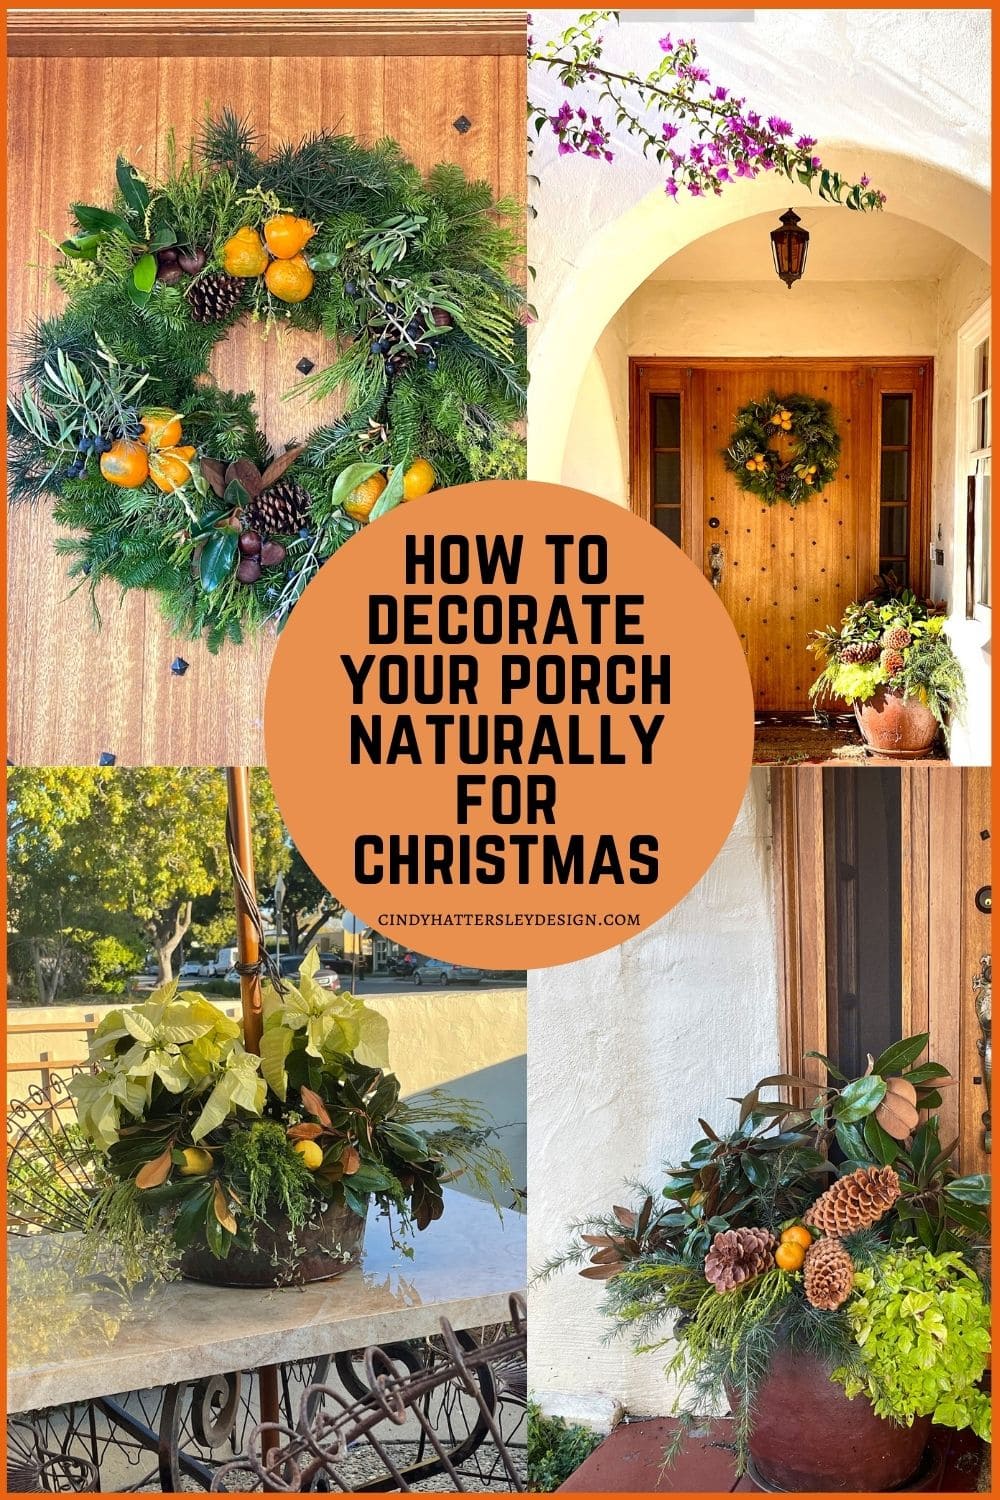 How to Decorate Your Porch Naturally for Christmas